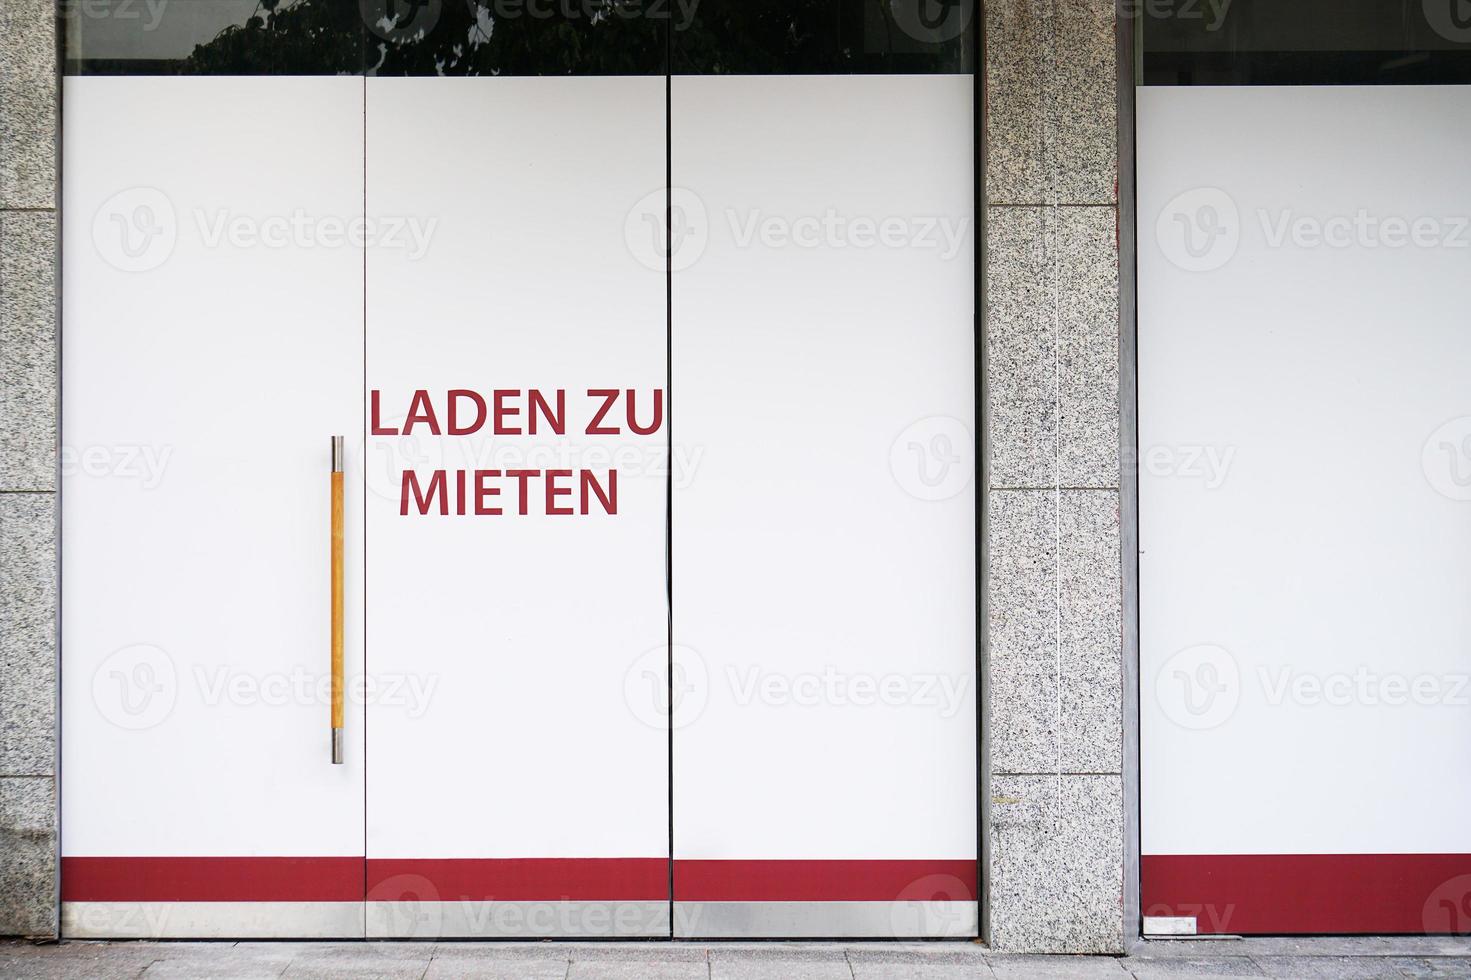 German vacancy sign on storefront - Laden zu mieten means store to let photo